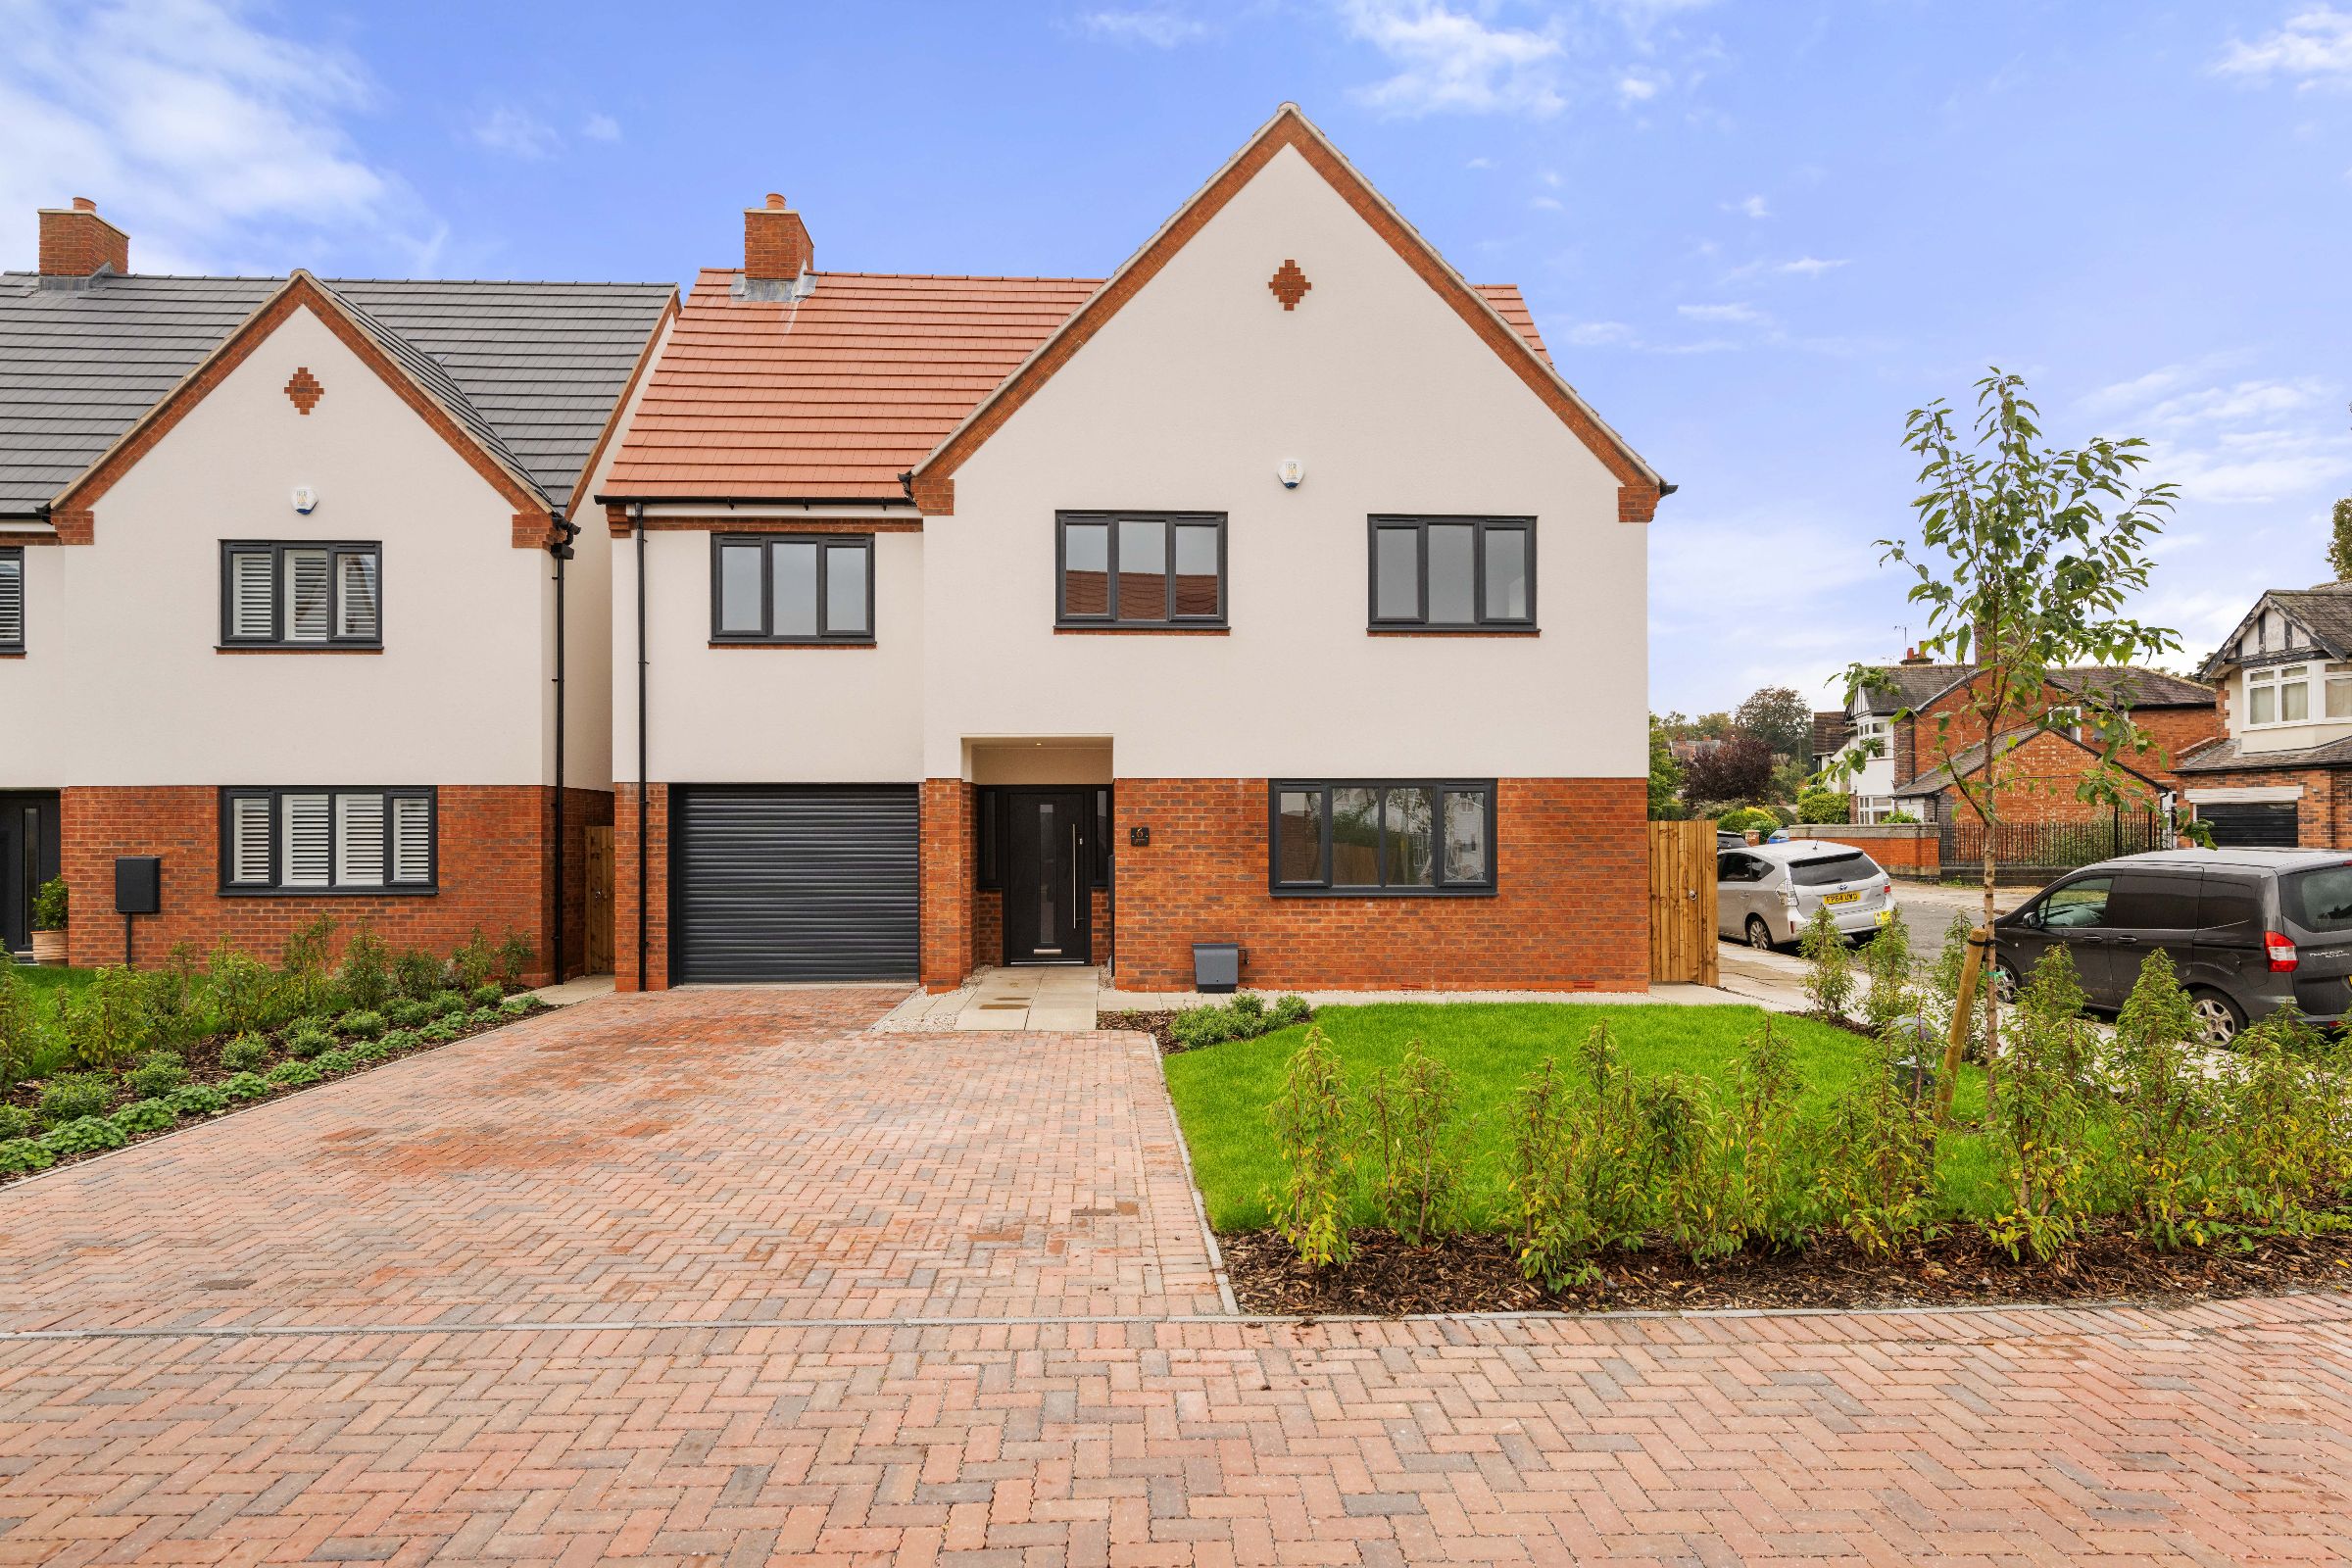 5 bed detached house to rent in Green View, Leicester - Property Image 1